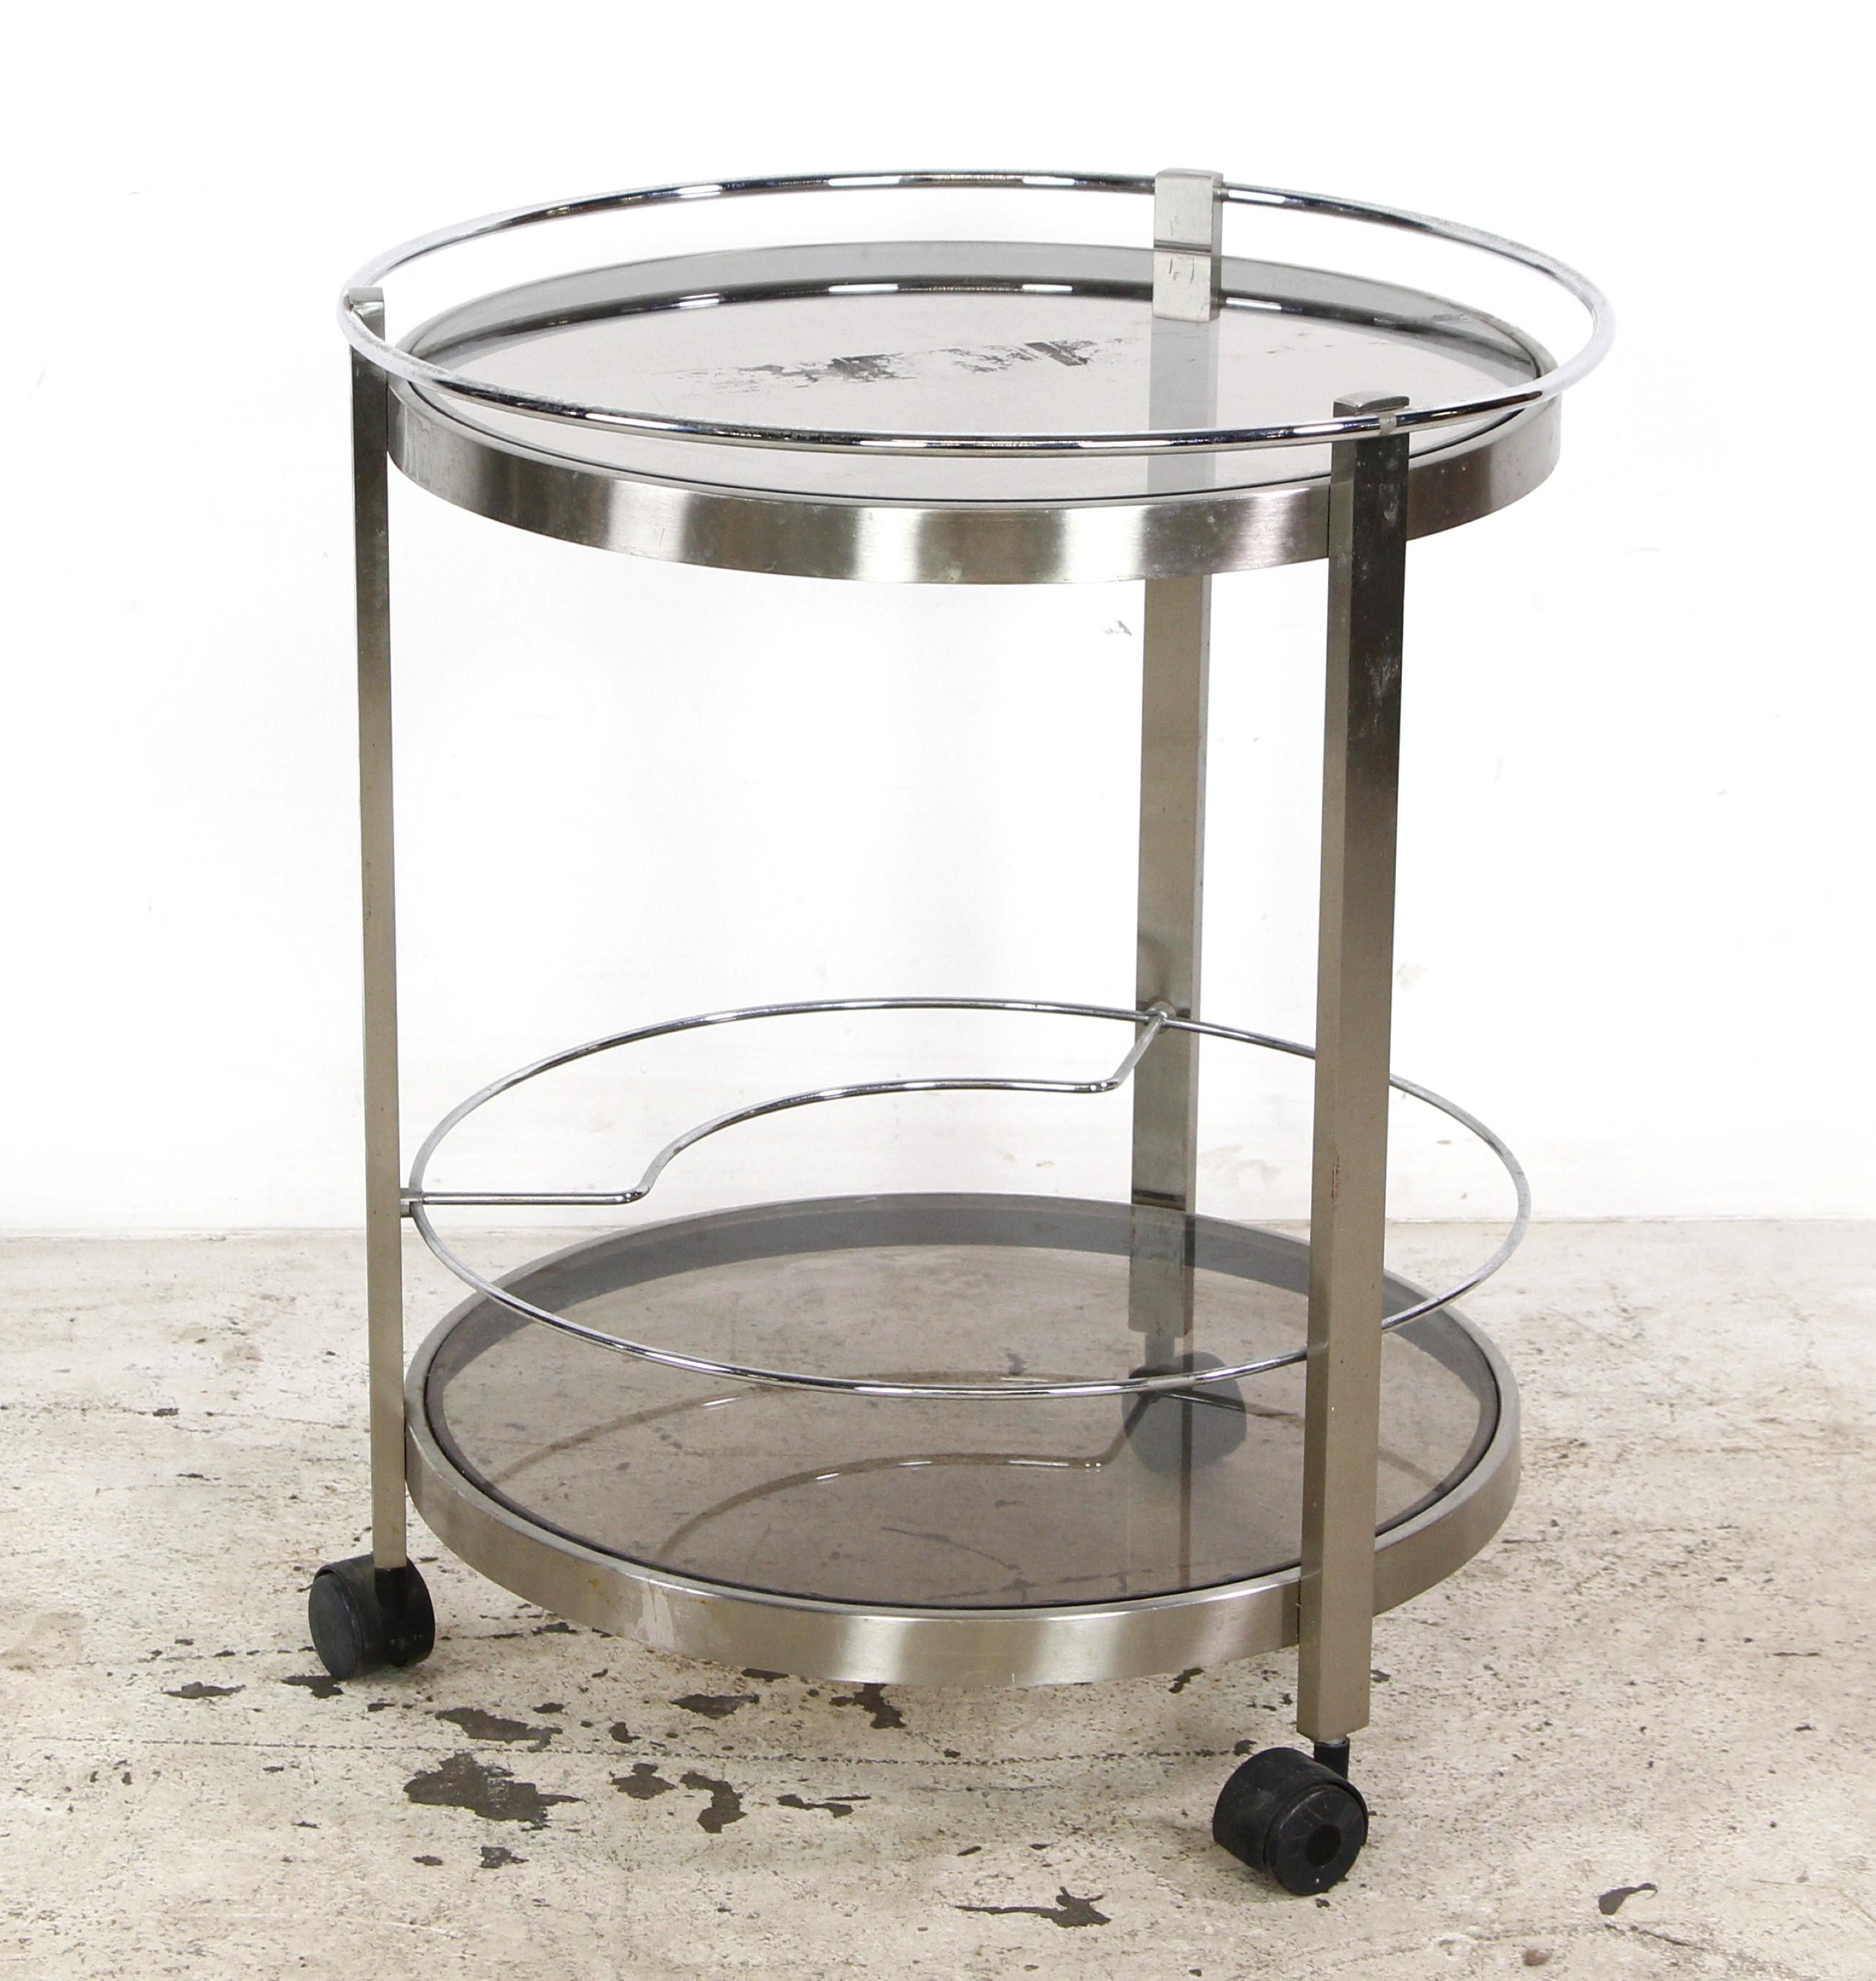 This European bar cart embodies modern elegance. With its nickeled steel frame and round tinted glass shelves, it reflects contemporary European design. This bar cart adds a touch of sophistication to spaces, offering a functional and stylish